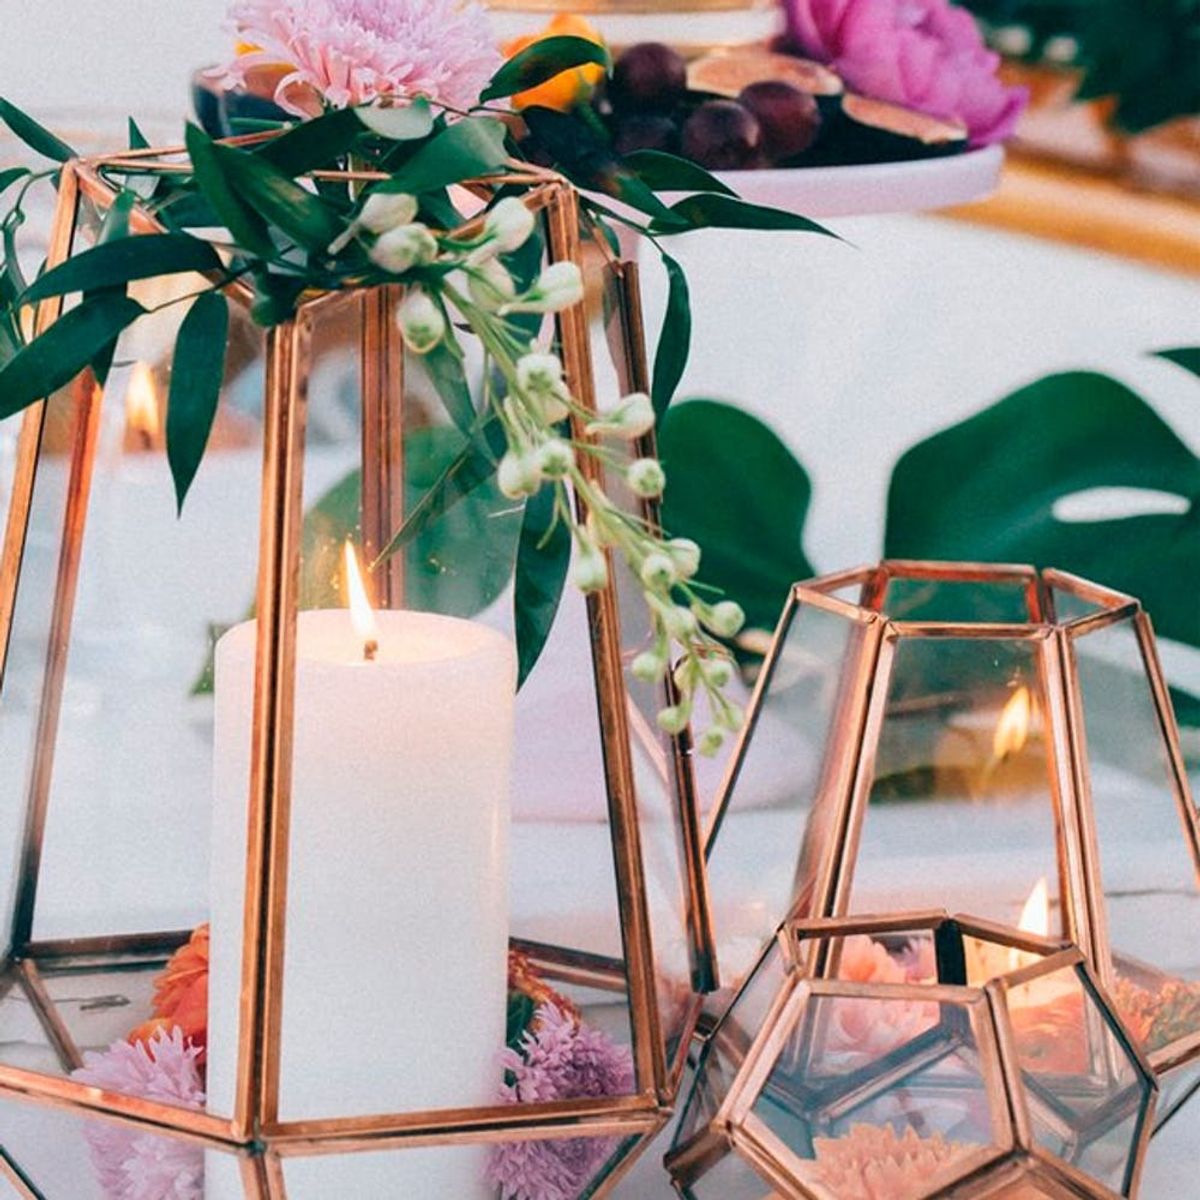 16 Trendy Copper-Inspired Ideas for Your Wedding